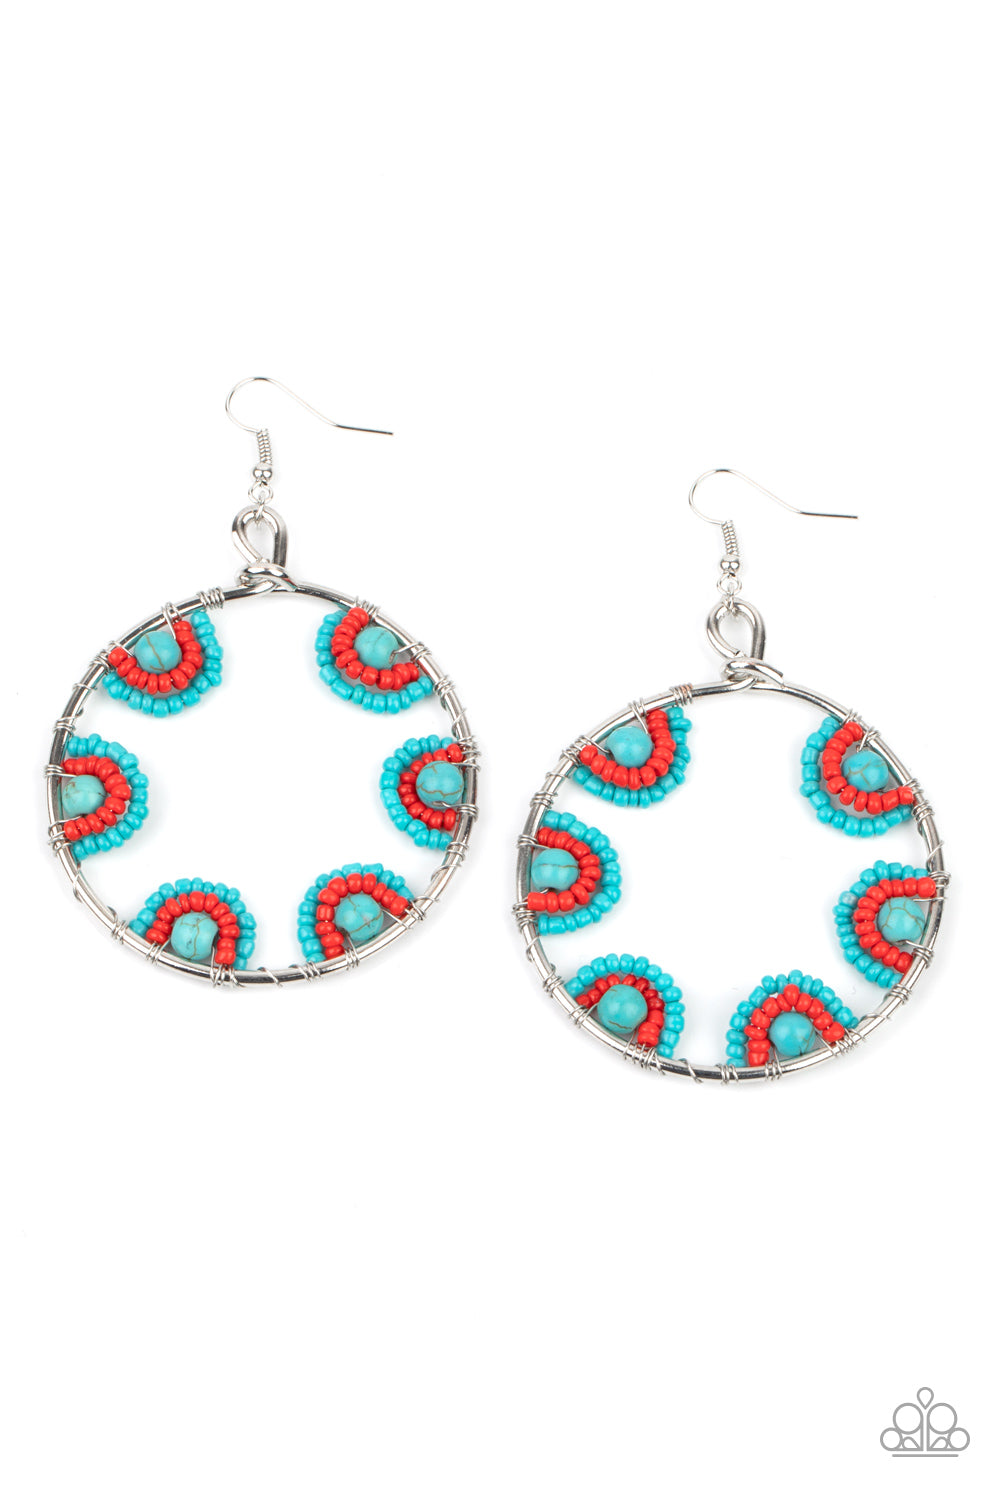 Off The Rim Blue Earring - Paparazzi Accessories  Red and turquoise seed beads are threaded on wires and looped over turquoise stones on the inside of a spacious silver hoop. The pattern makes its way around the inside of the circle for an around-the-world air. Earring attaches to a standard fishhook fitting.  All Paparazzi Accessories are lead free and nickel free!  Sold as one pair of earrings.